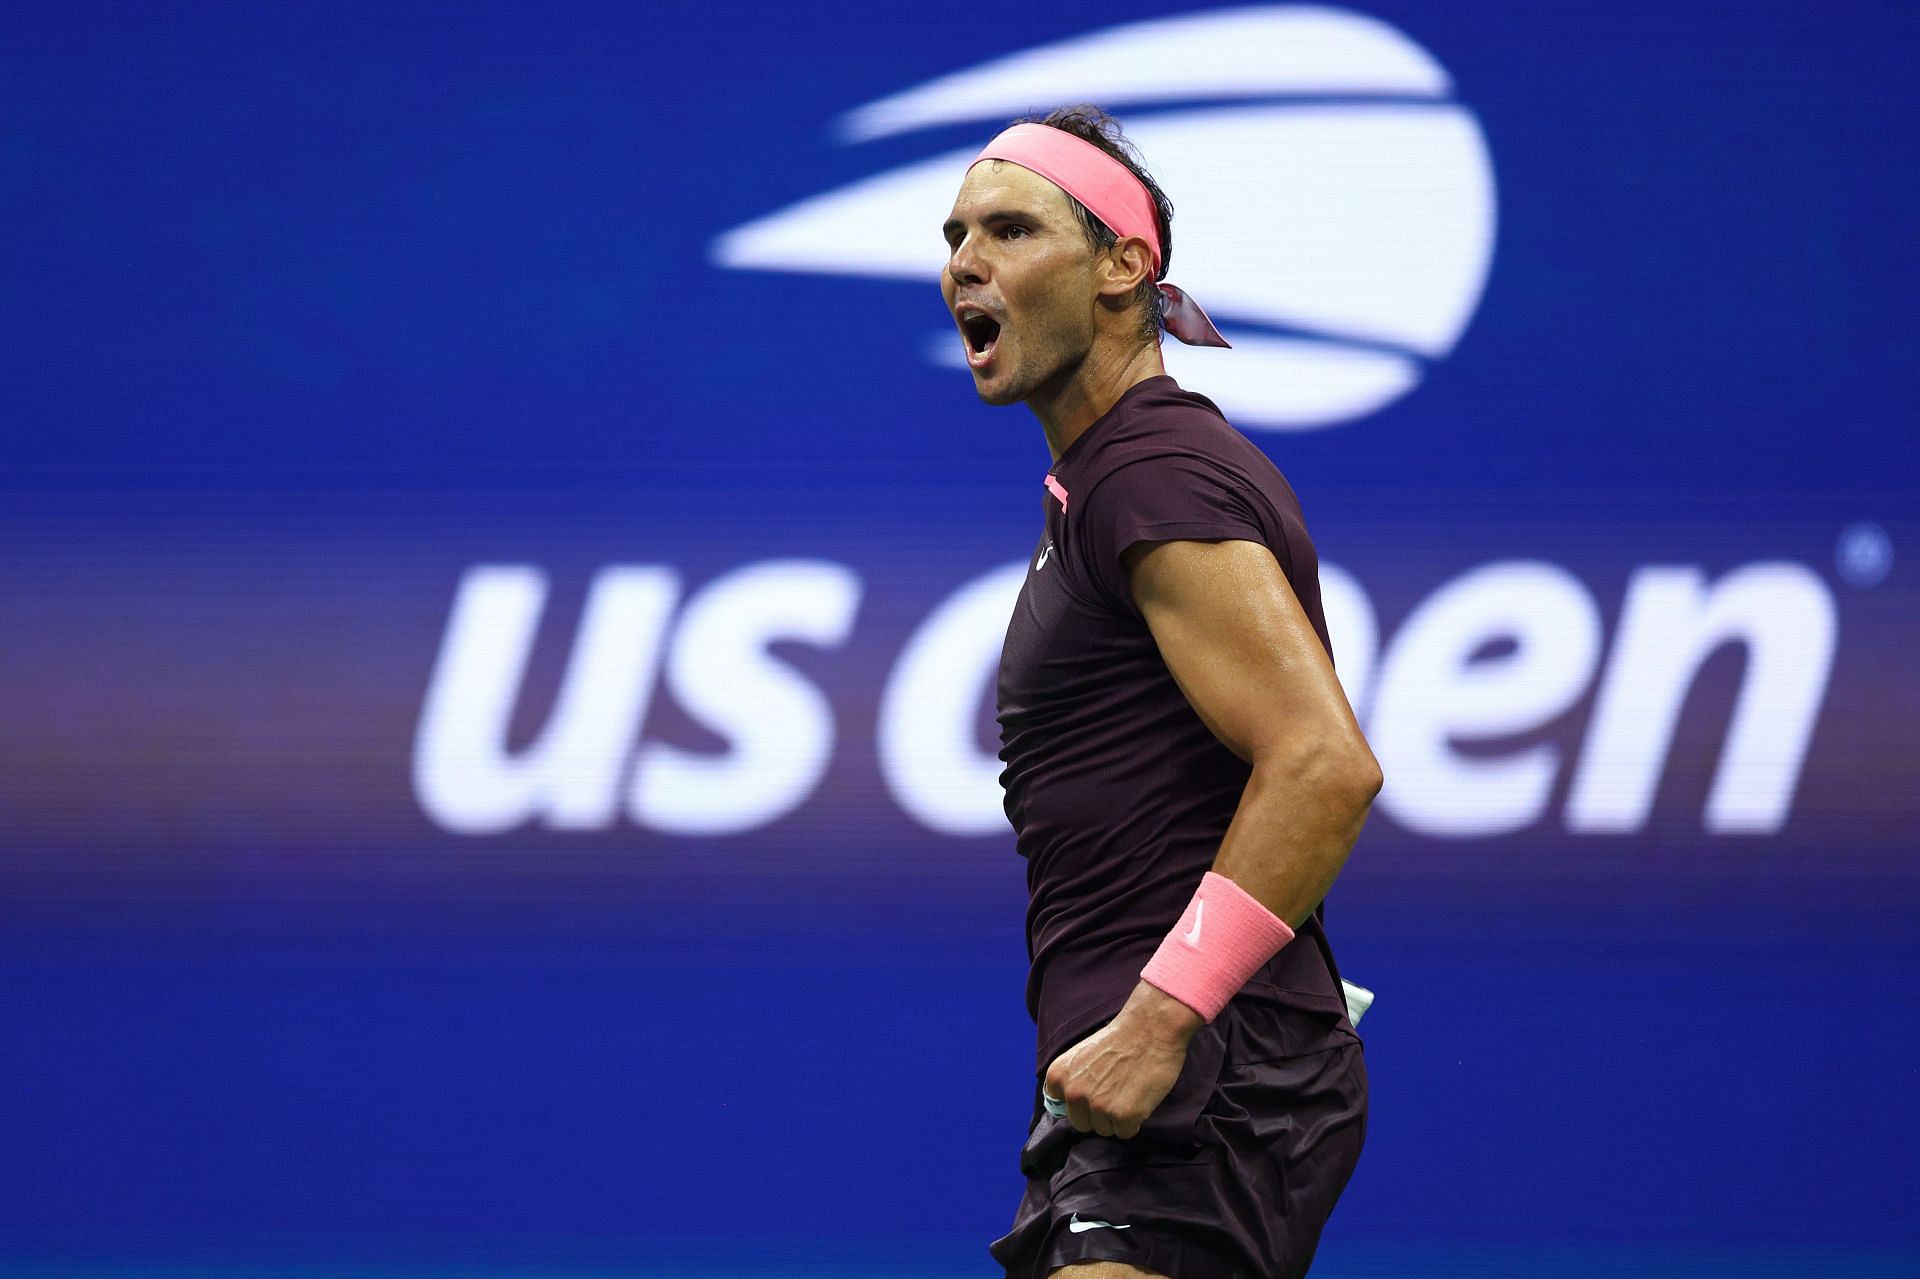 Rafael Nadal will be up against Fabio Fognini in the second round of the US Open